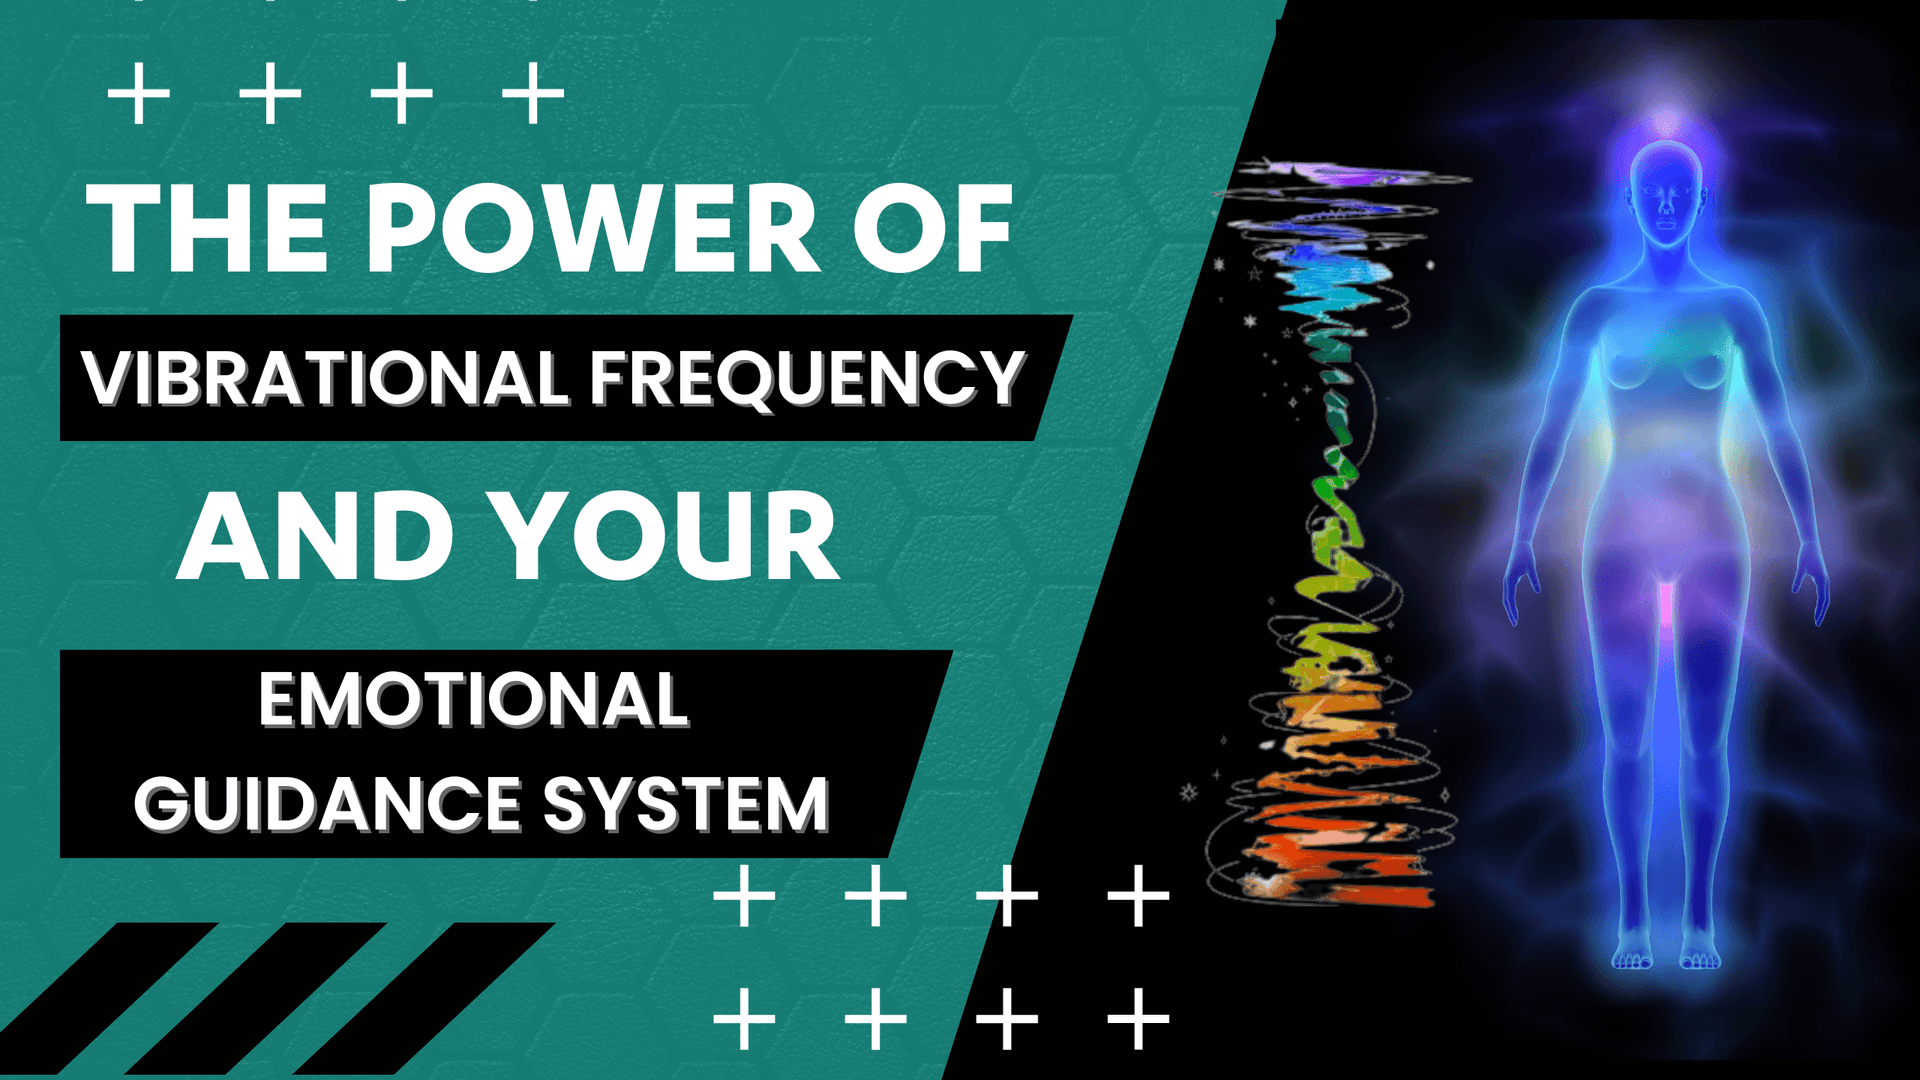 The Power of Vibrational Frequency and Your Emotional Guidance System